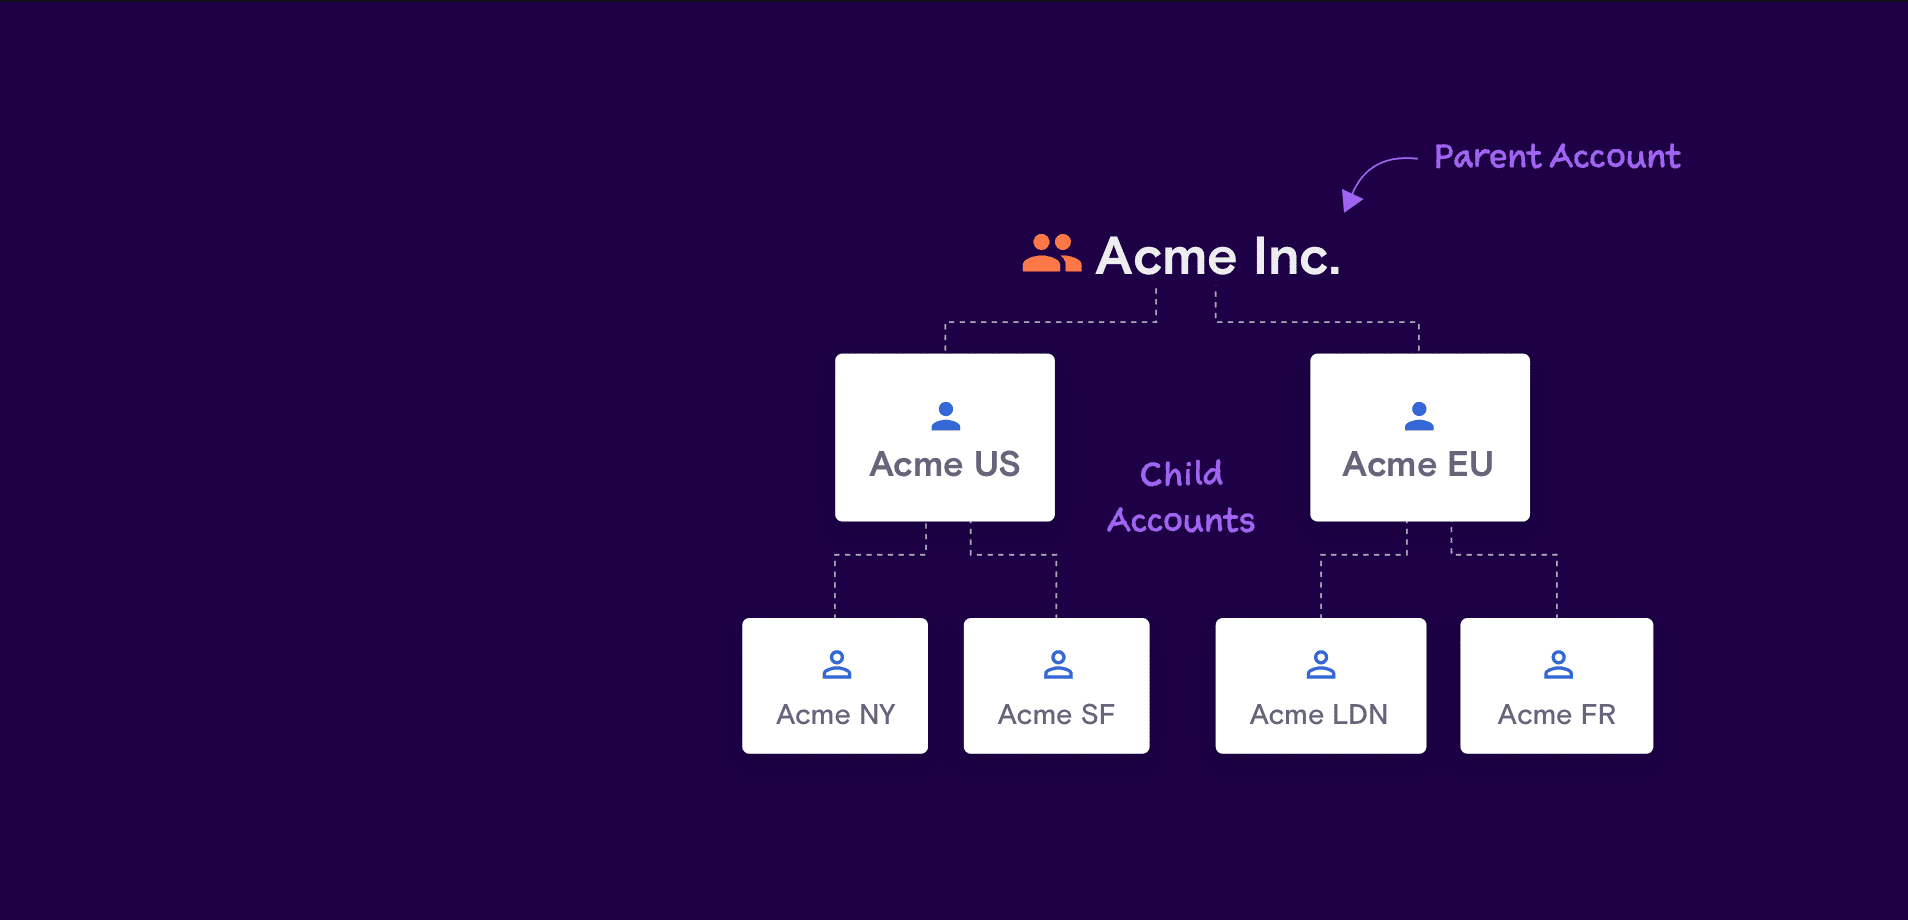 Account Hierarchy of a Fictional Acme Inc